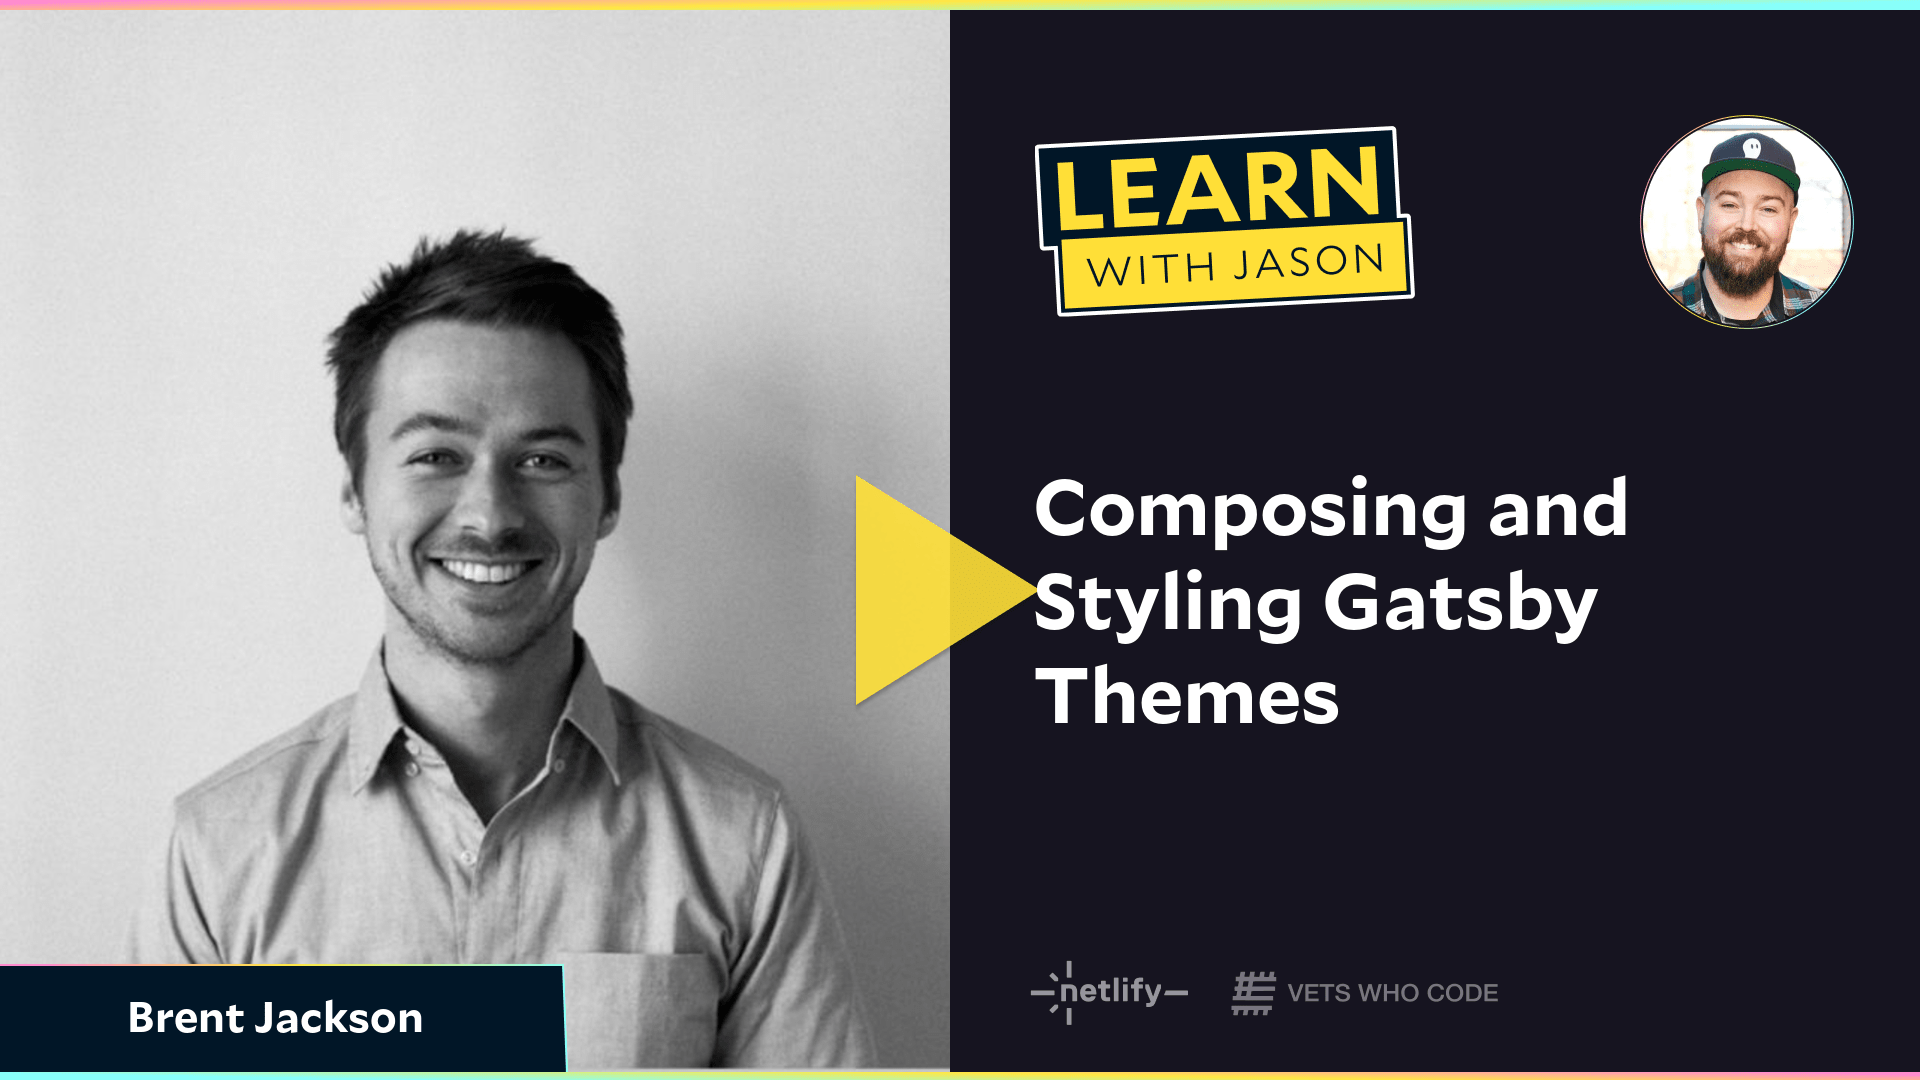 Composing and Styling Gatsby Themes (with Brent Jackson)